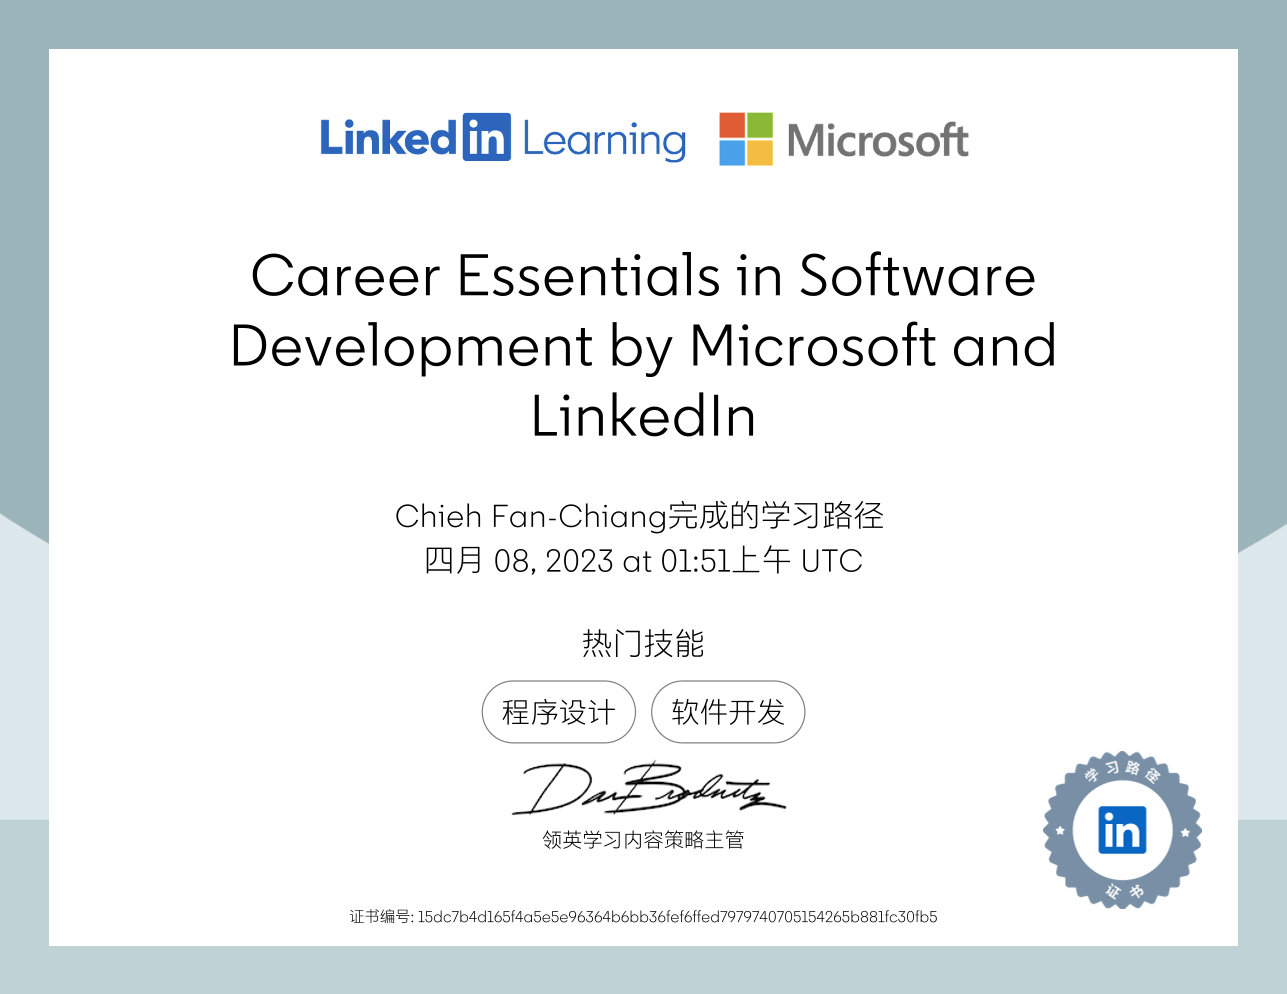 Career Essentials in Software Development by Microsoft and LinkedIn